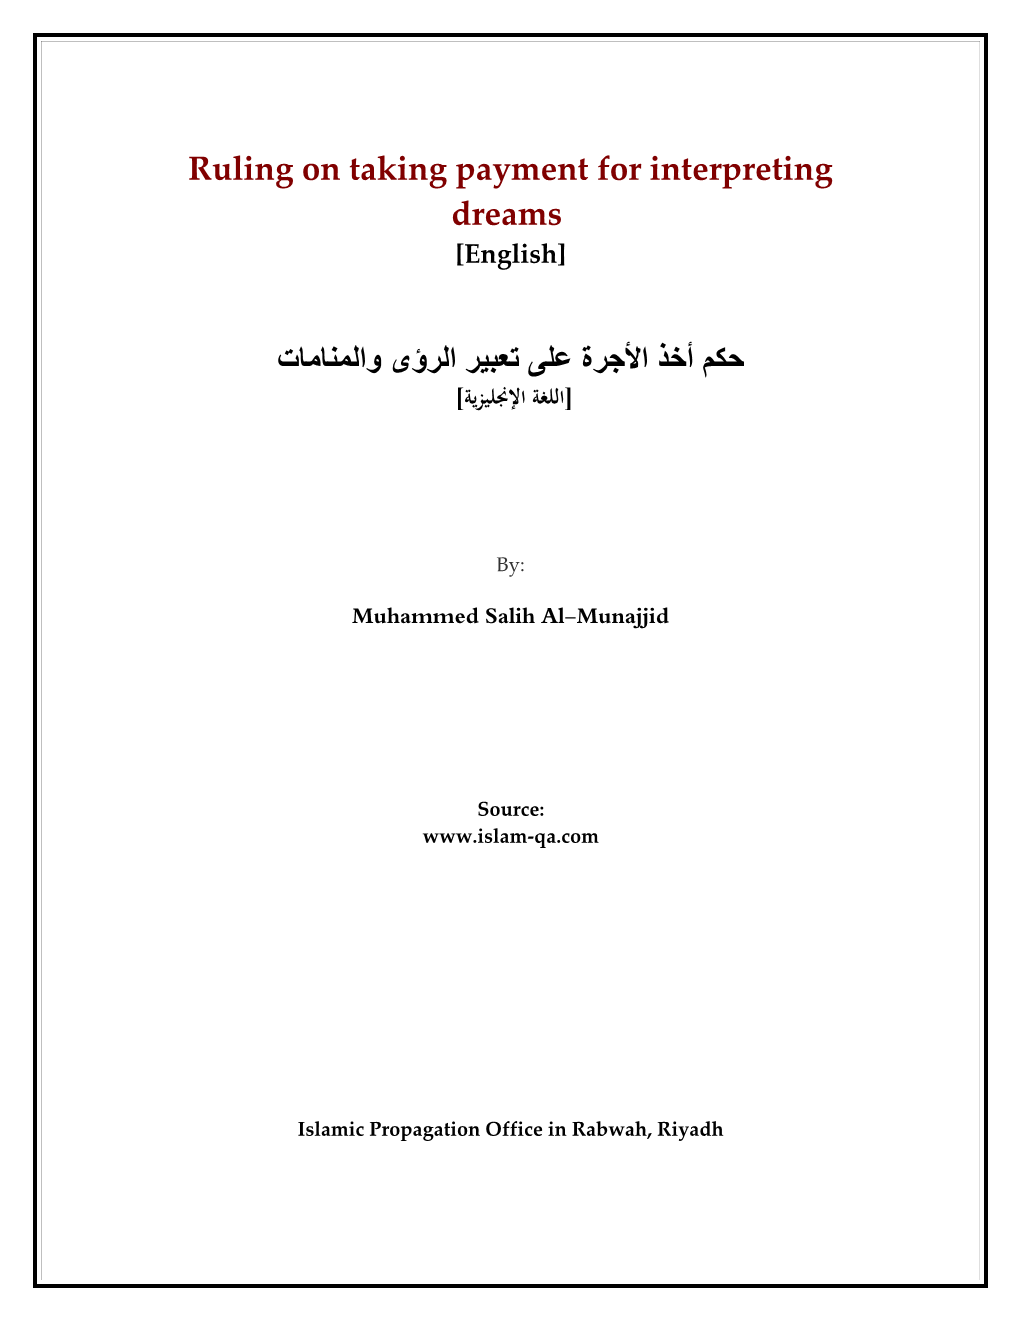 Ruling on Taking Payment for Interpreting Dreams